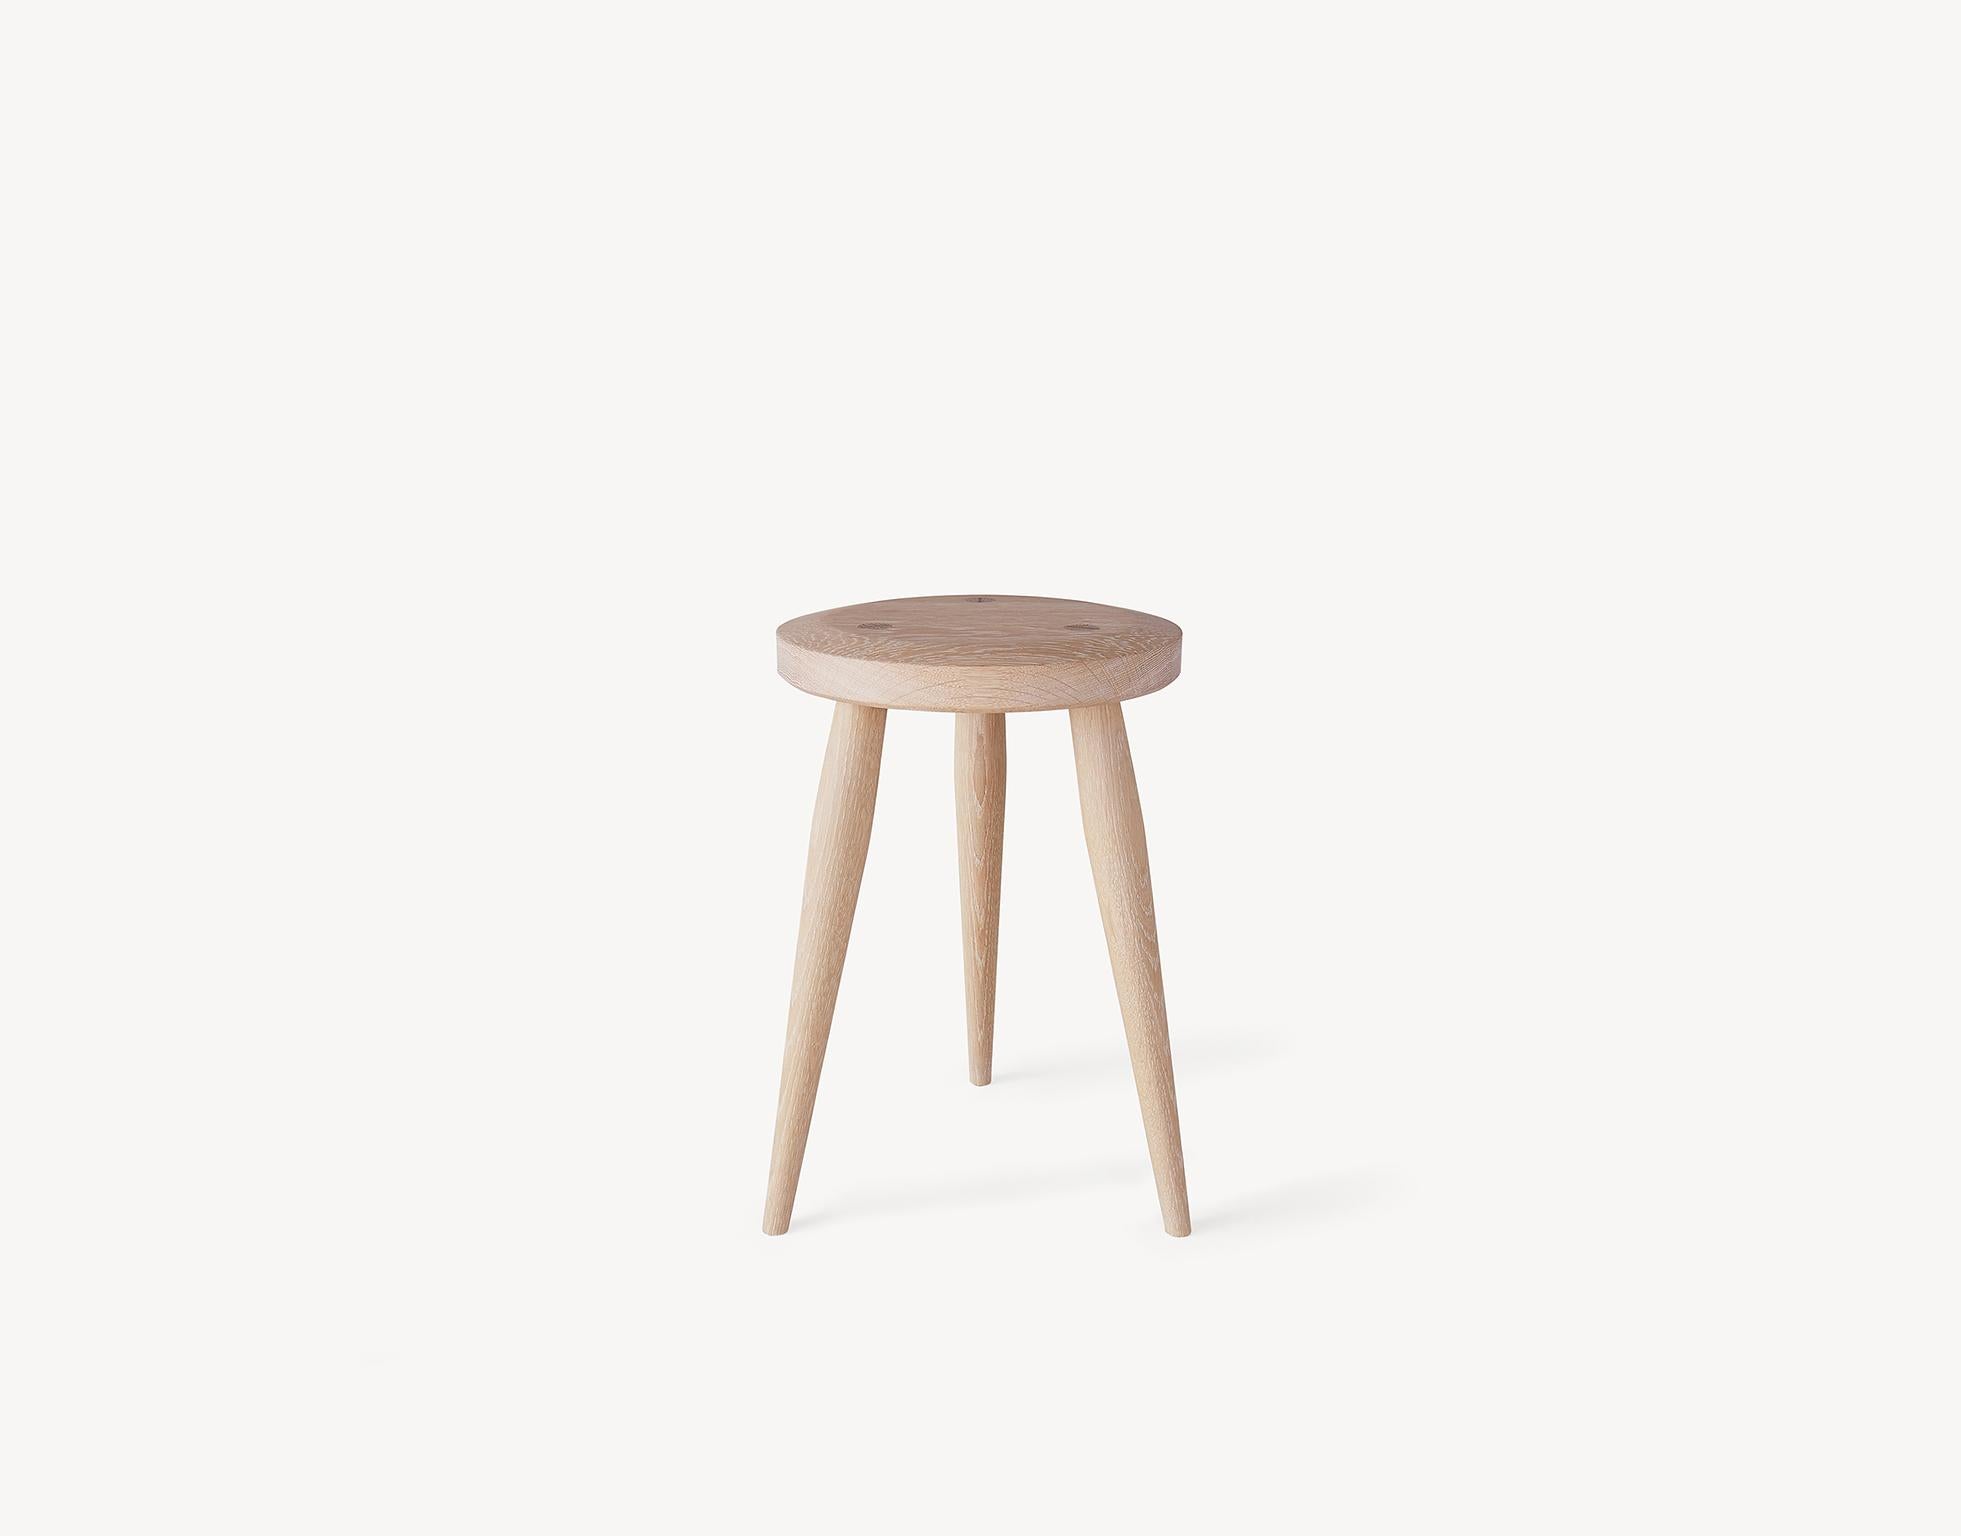 Canadian Minimal Three-Legged Stool in Blackened Ash by Coolican & Company